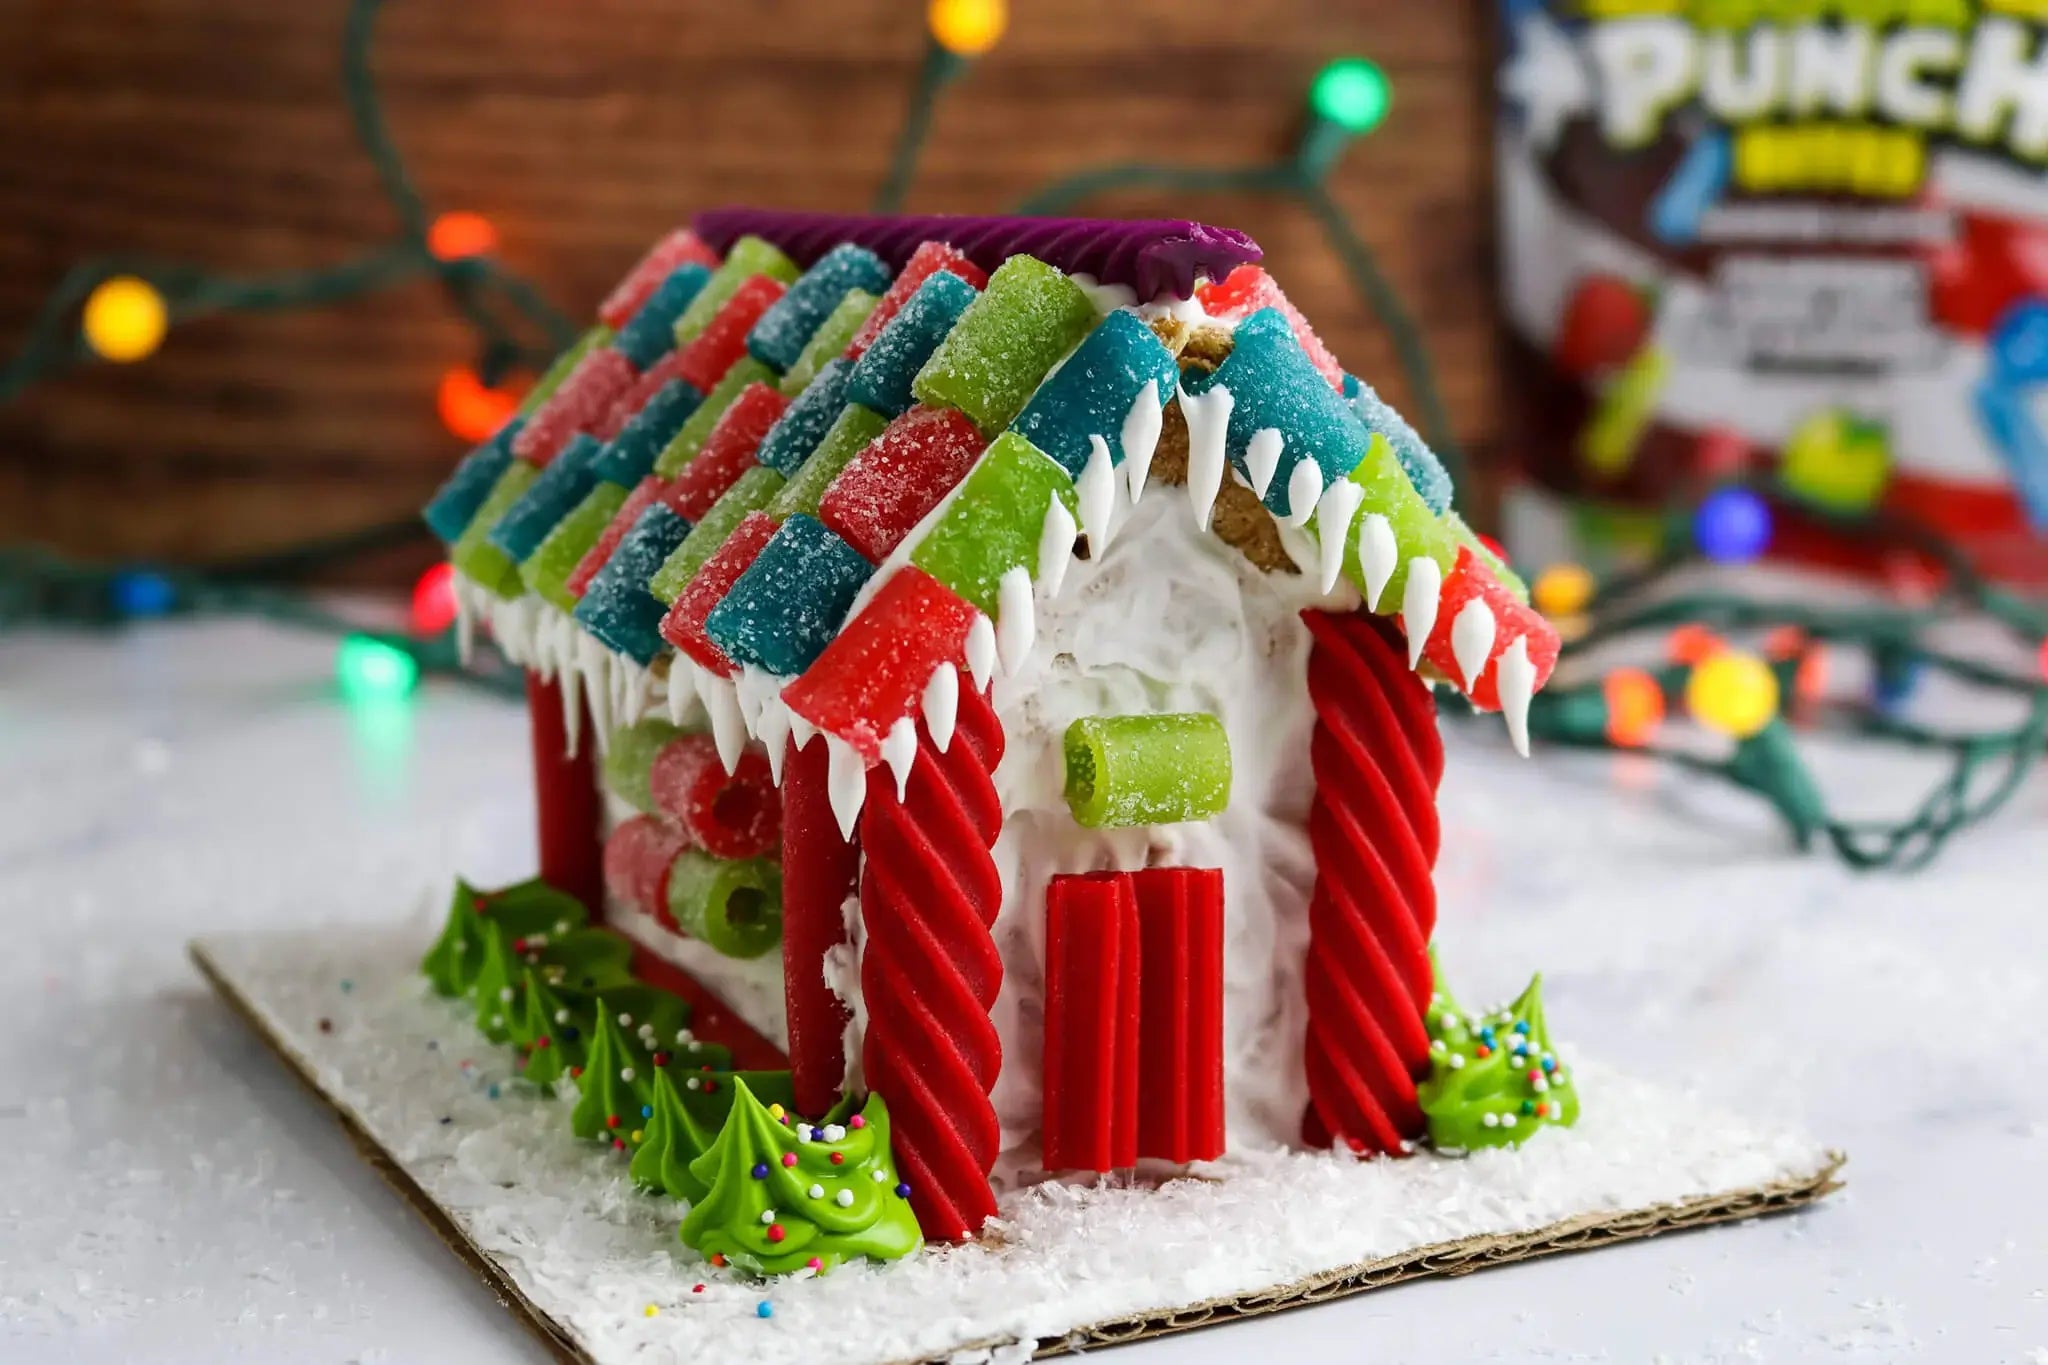 Graham Cracker gingerbread house decorated with Red Vines and Sour Punch